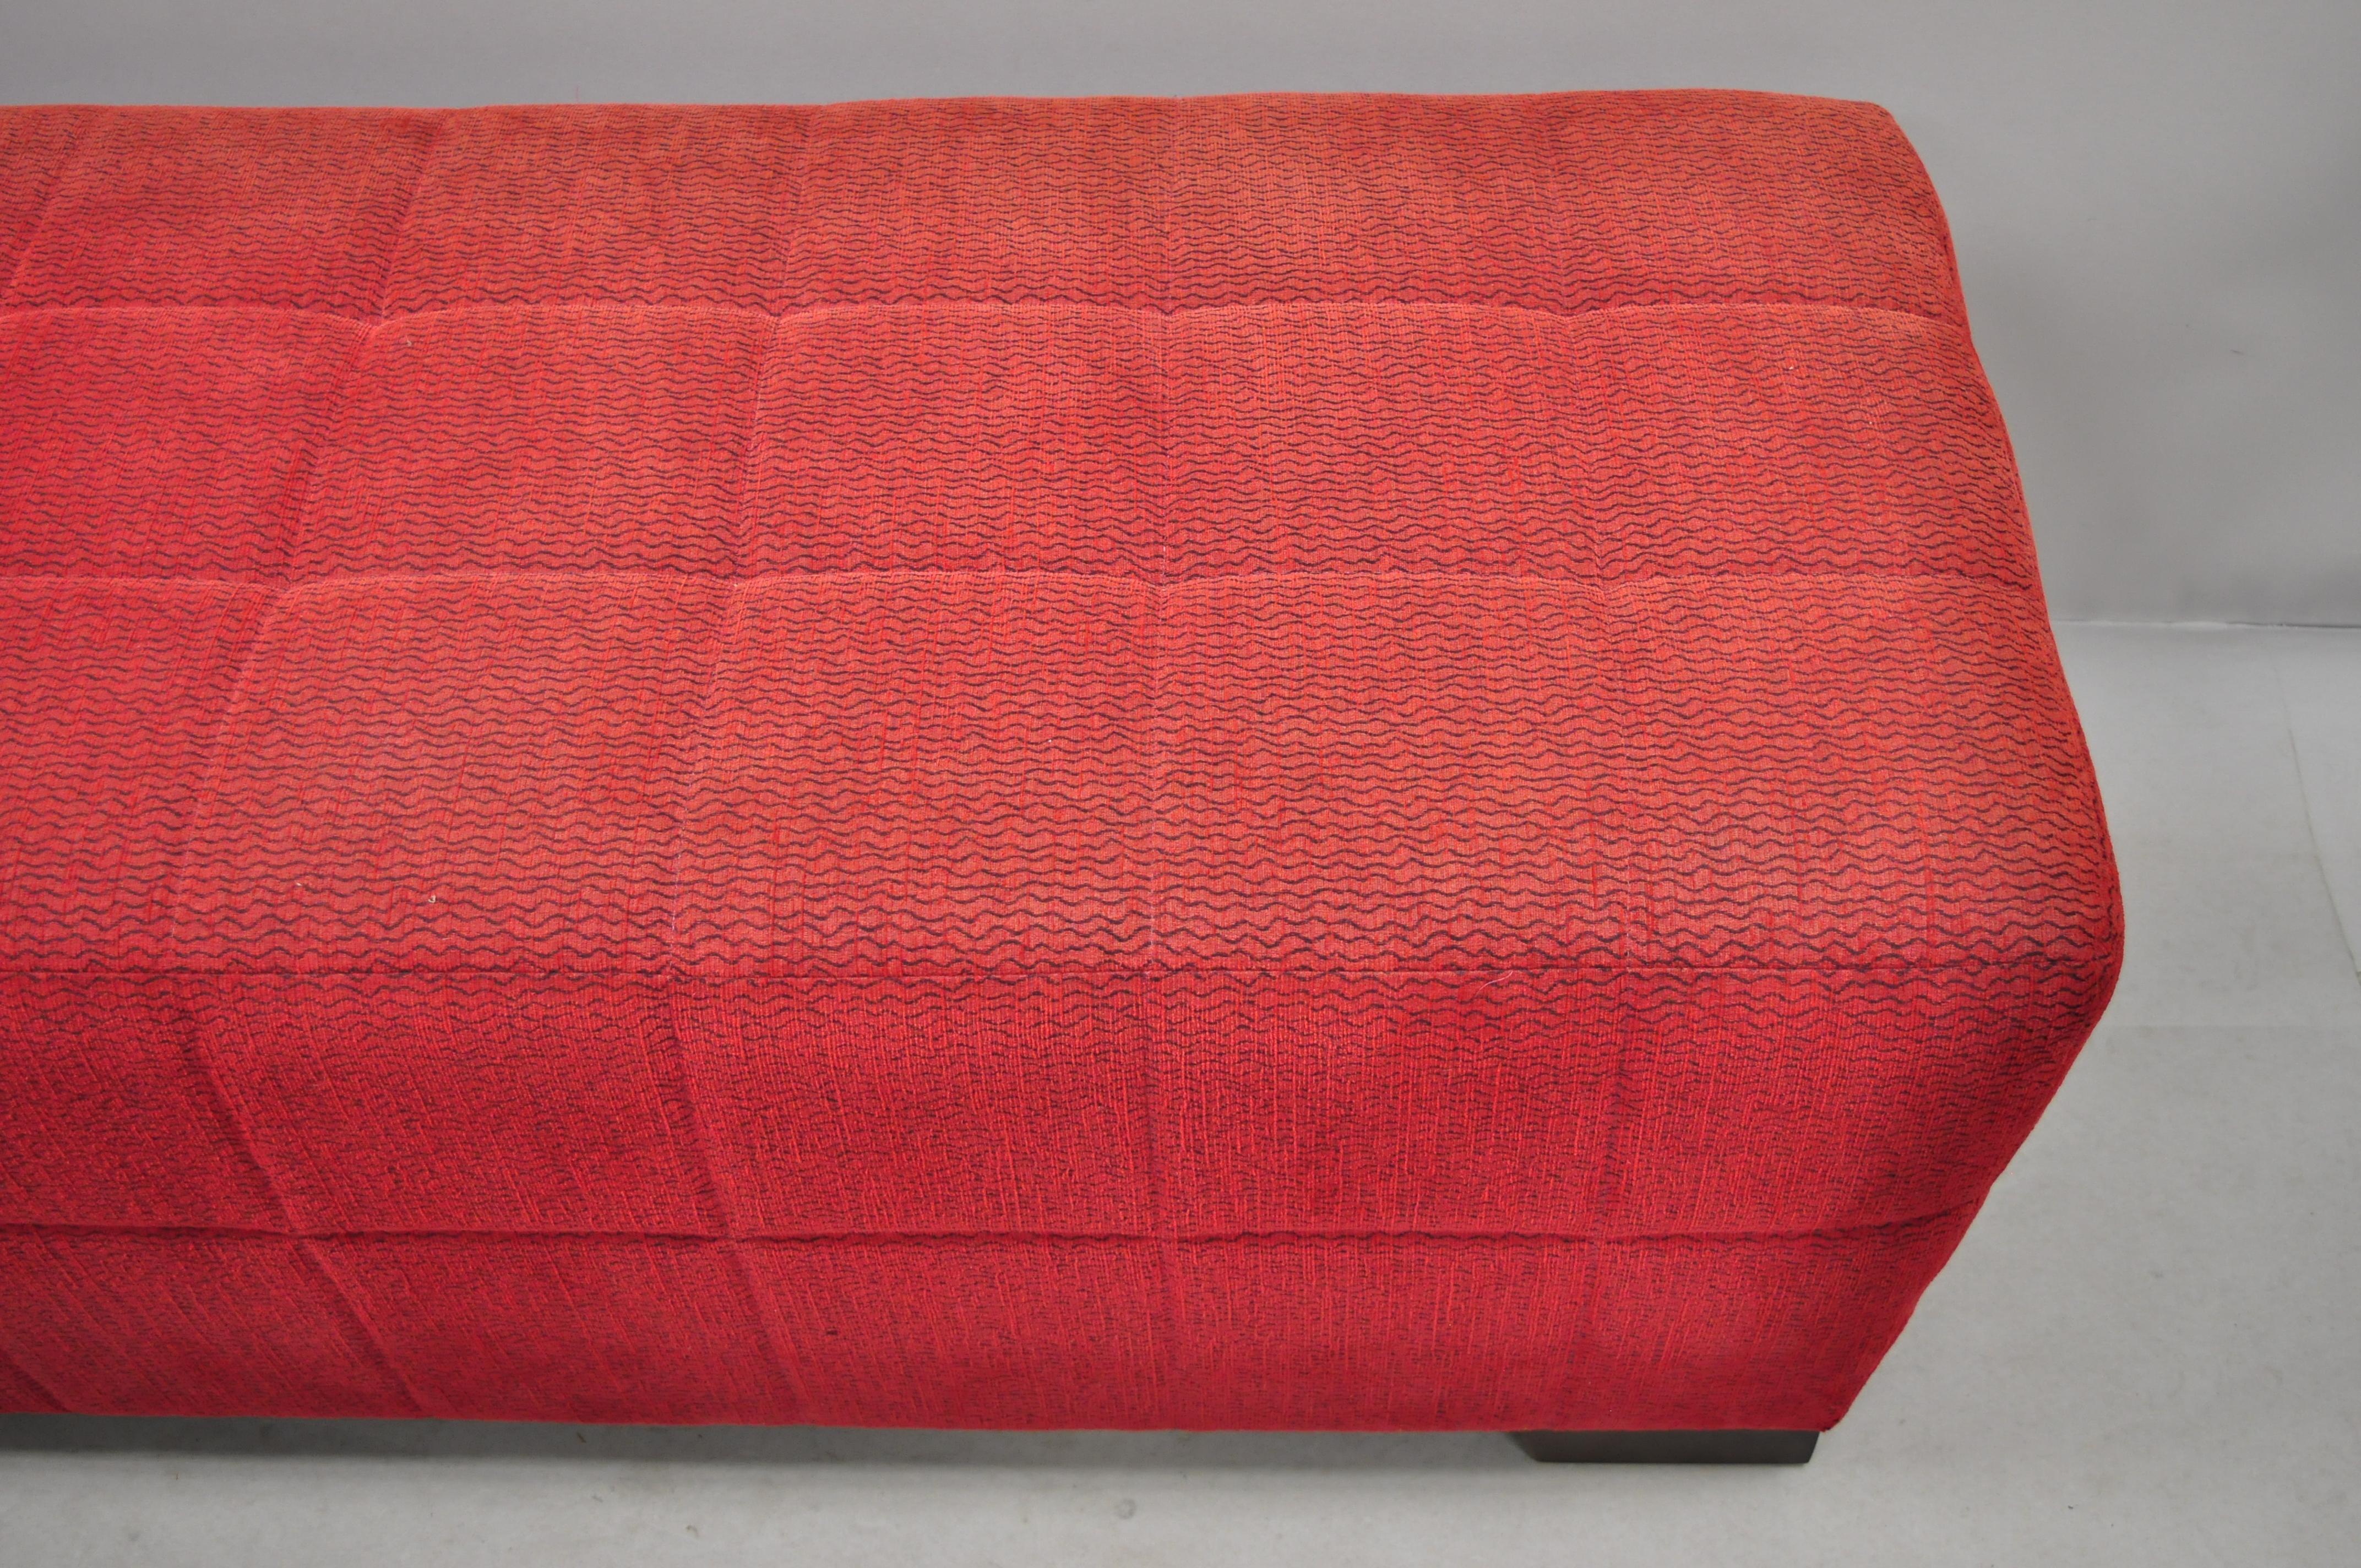 North American Directional Red Upholstered Large Modern Charles Bench Seat Ottoman For Sale